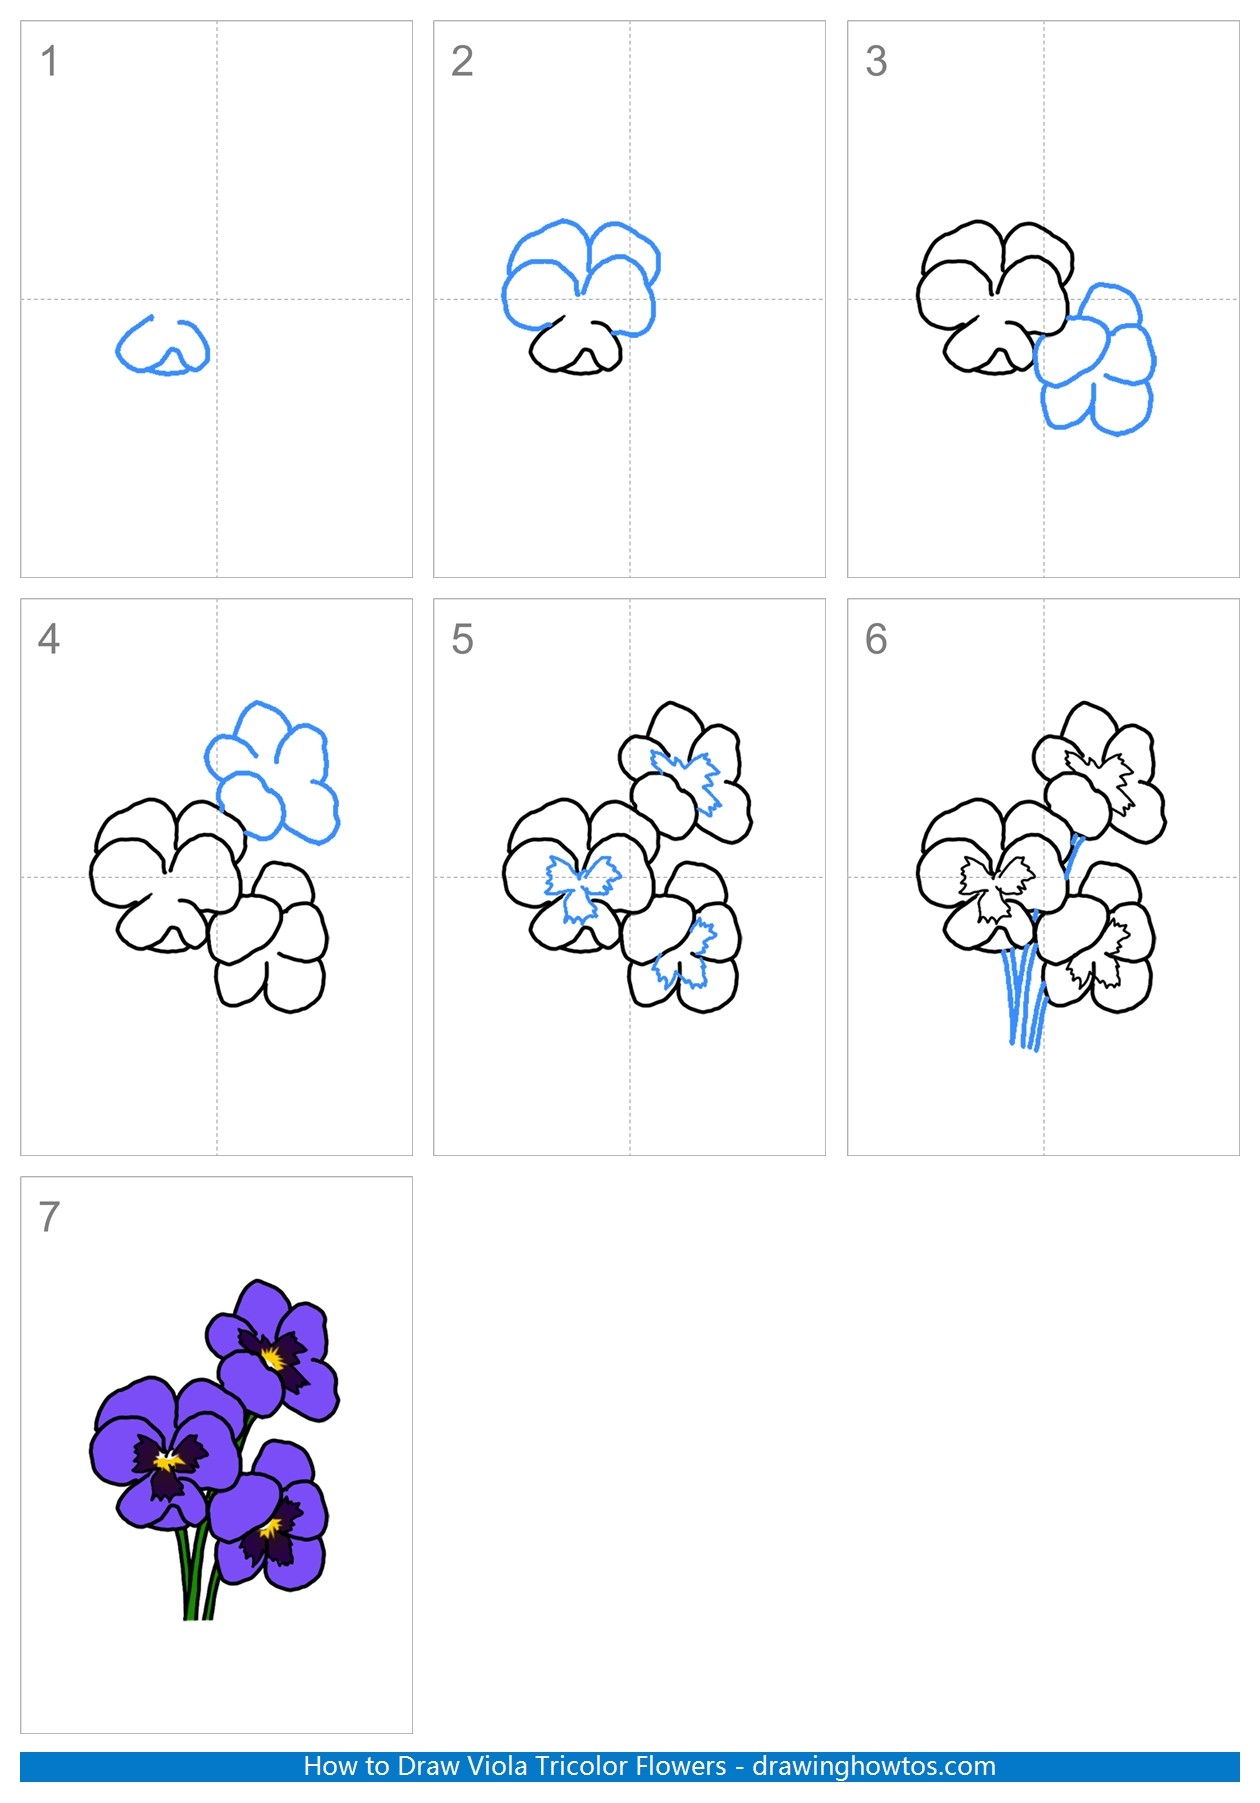 How to Draw Viola Tricolor Flowers Step by Step